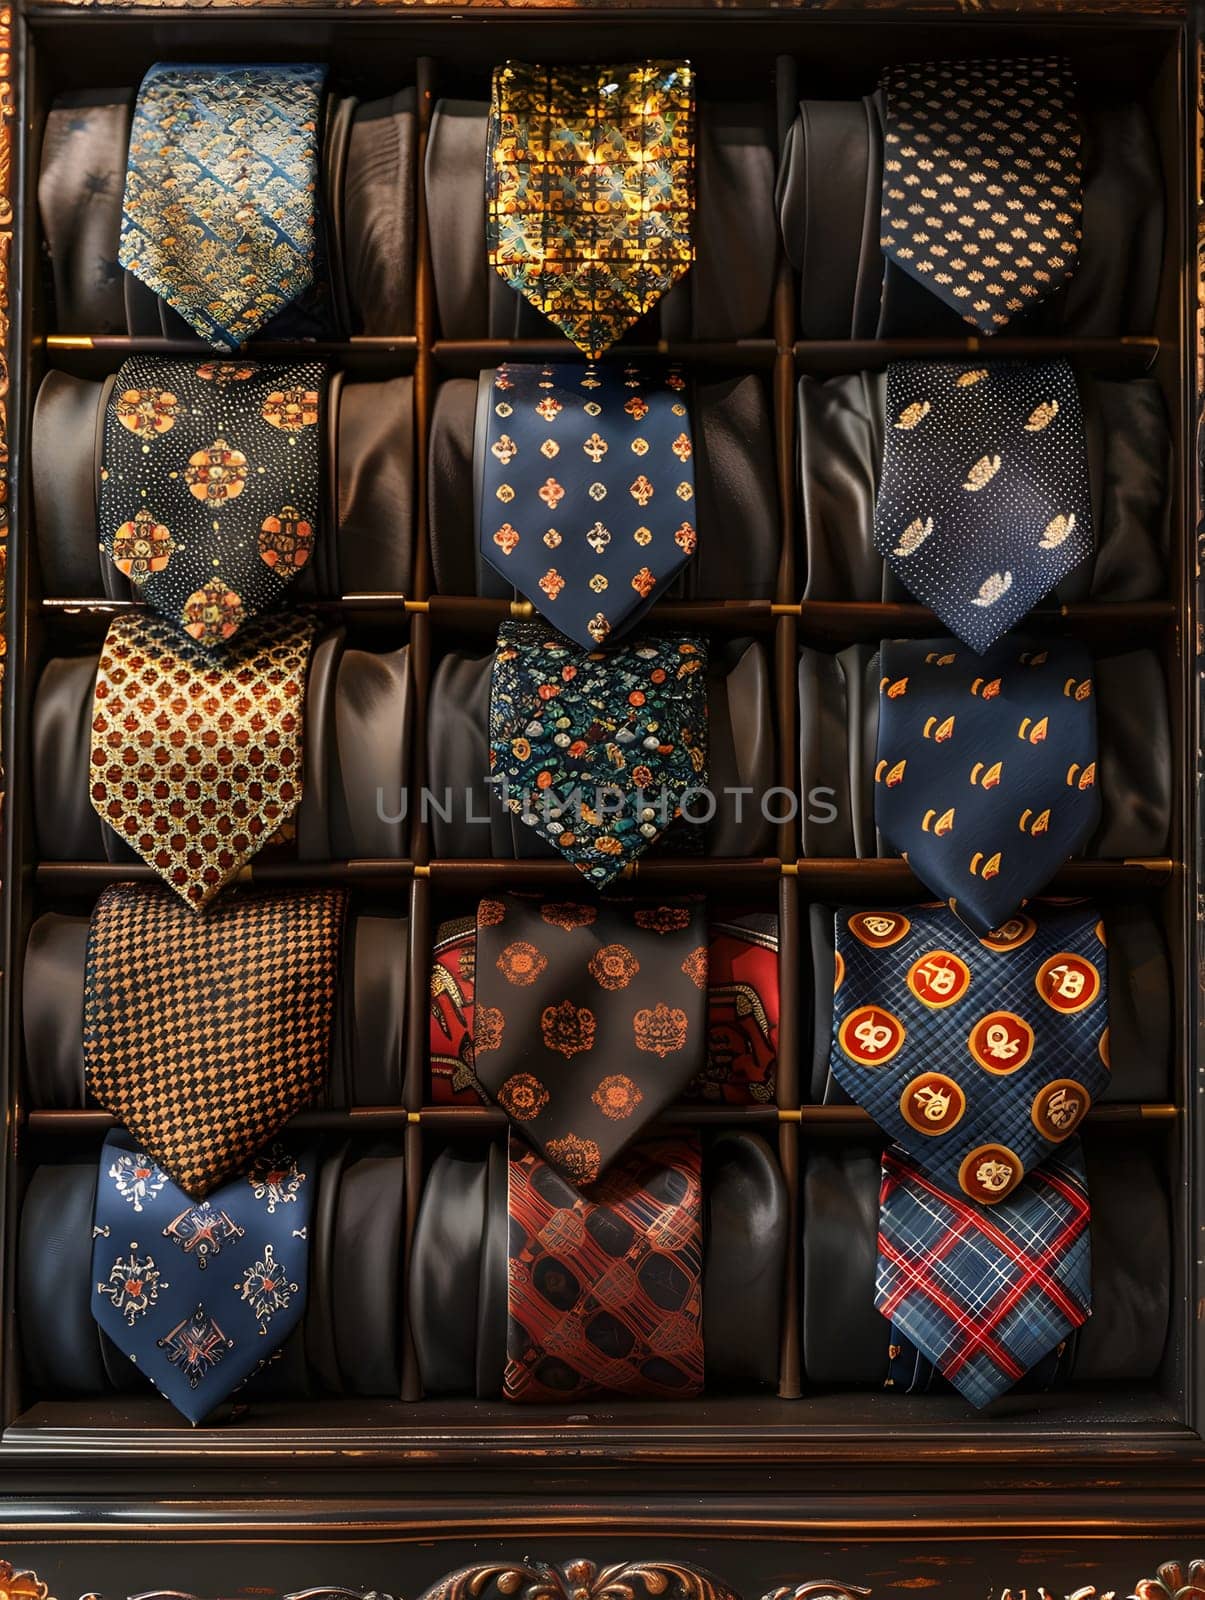 A rectangular brown wooden display case filled with assorted textile ties in various shades and patterns, showcased behind glass. The flooring is artfully decorated with a plaid design